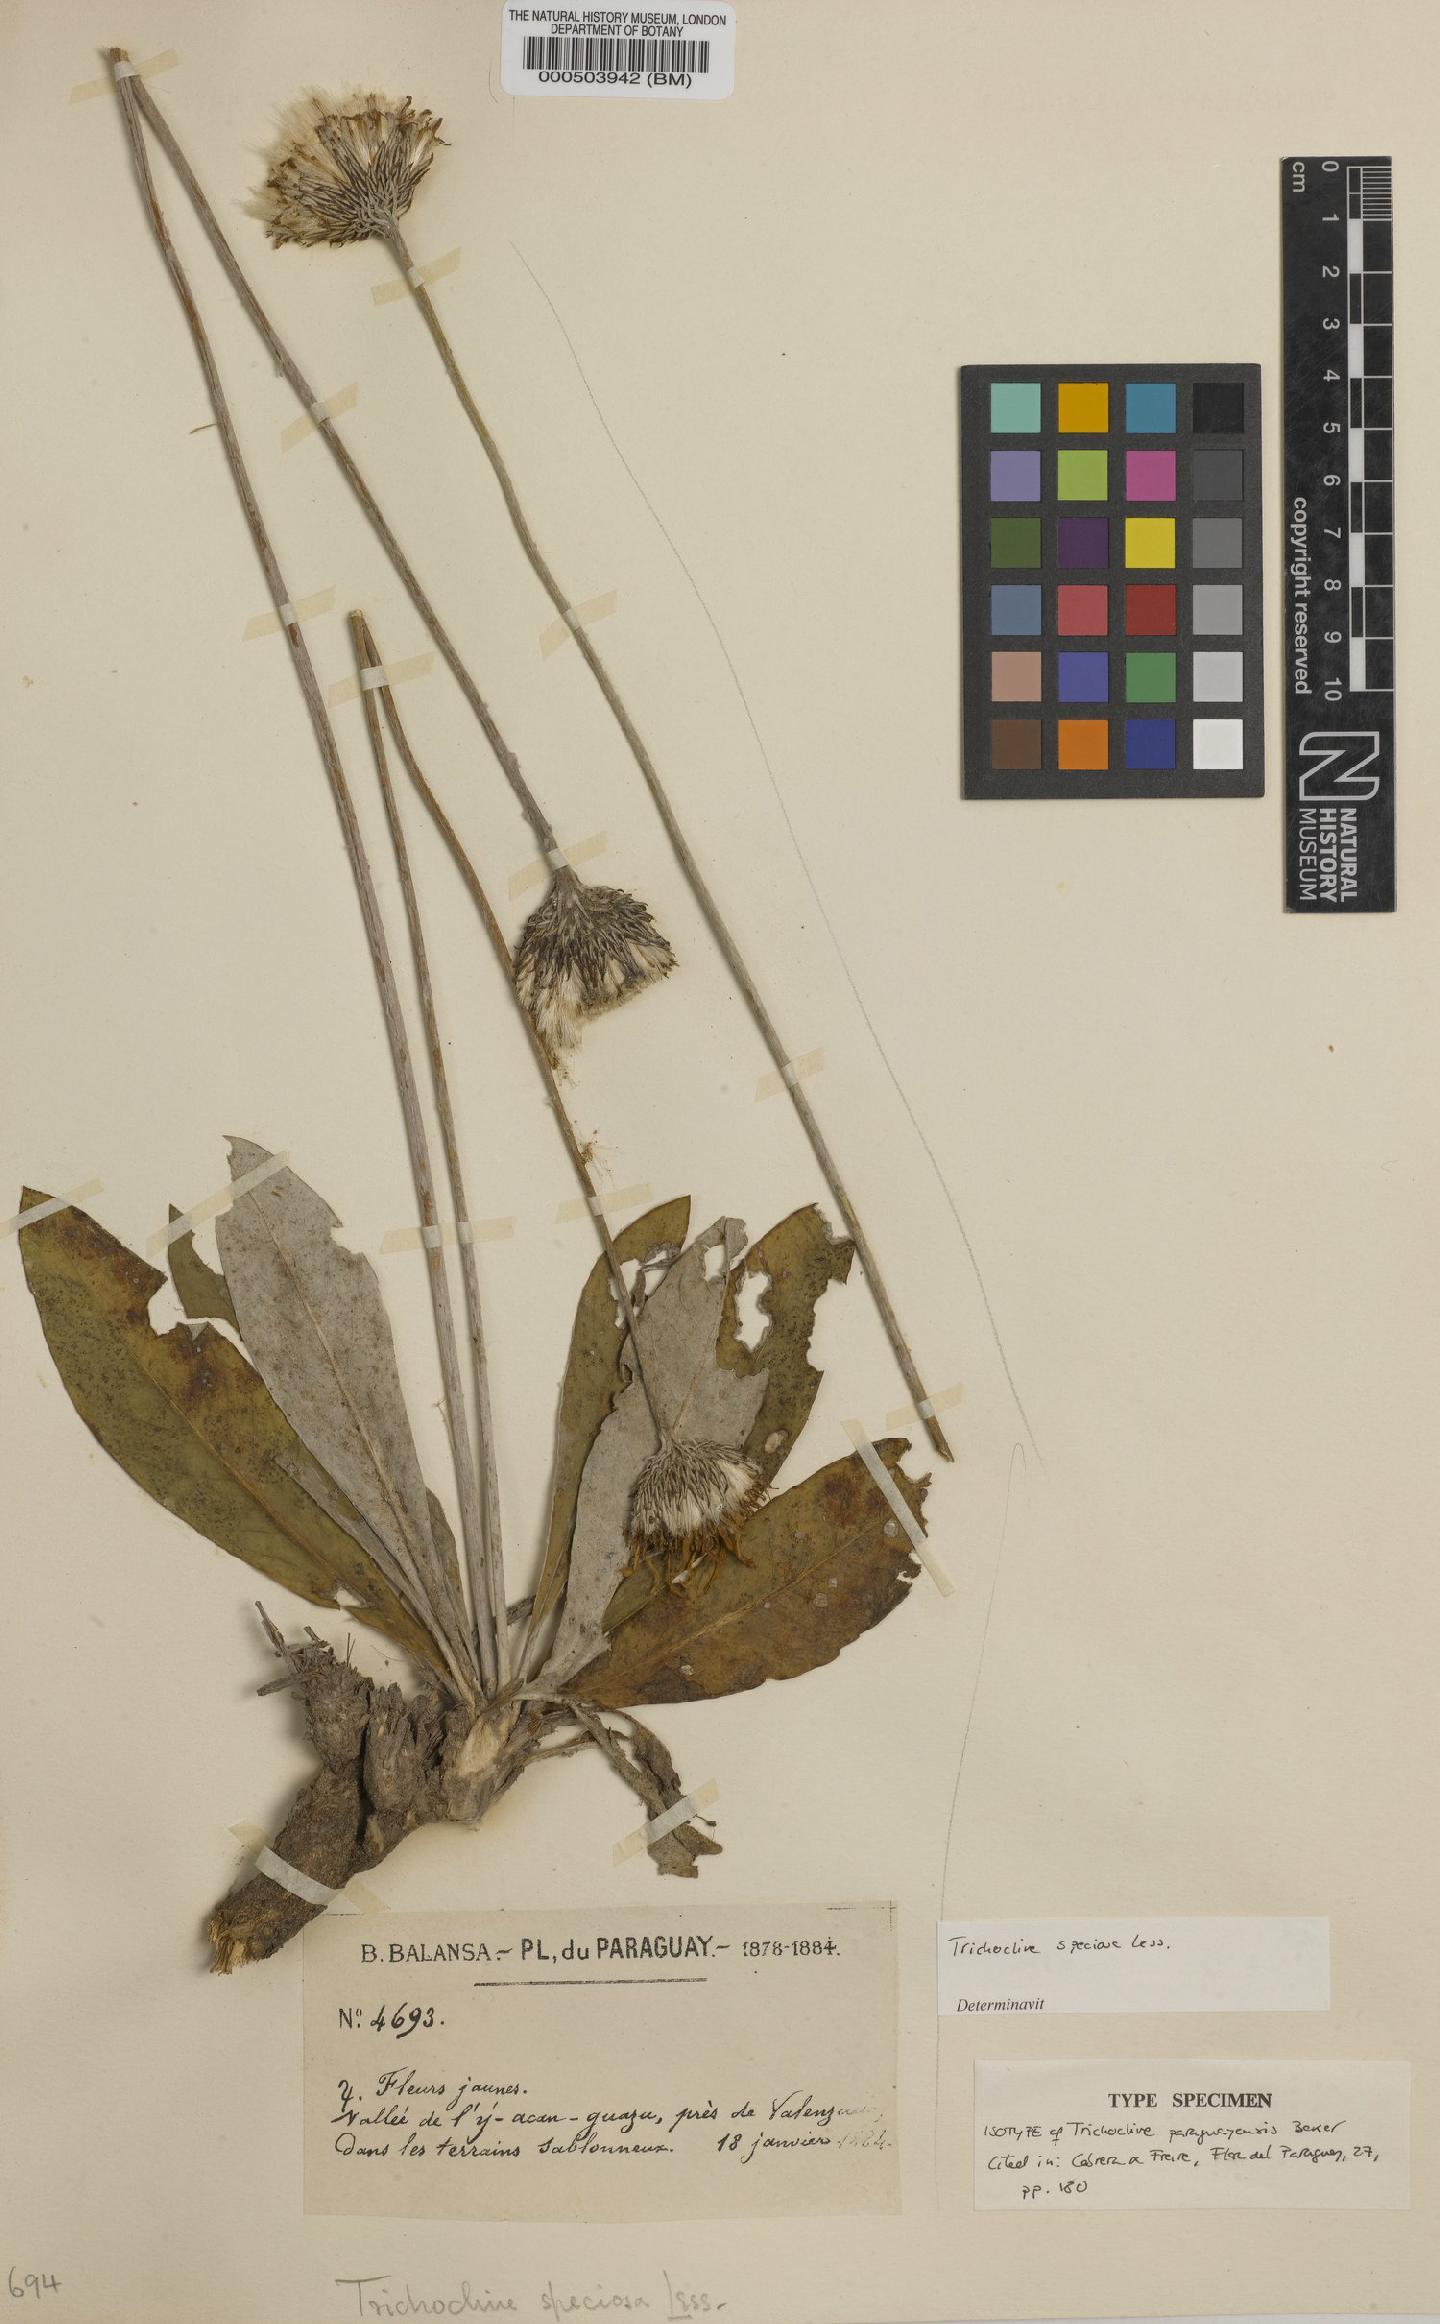 To NHMUK collection (Trichocline speciosa Less; Isotype; NHMUK:ecatalogue:4567323)